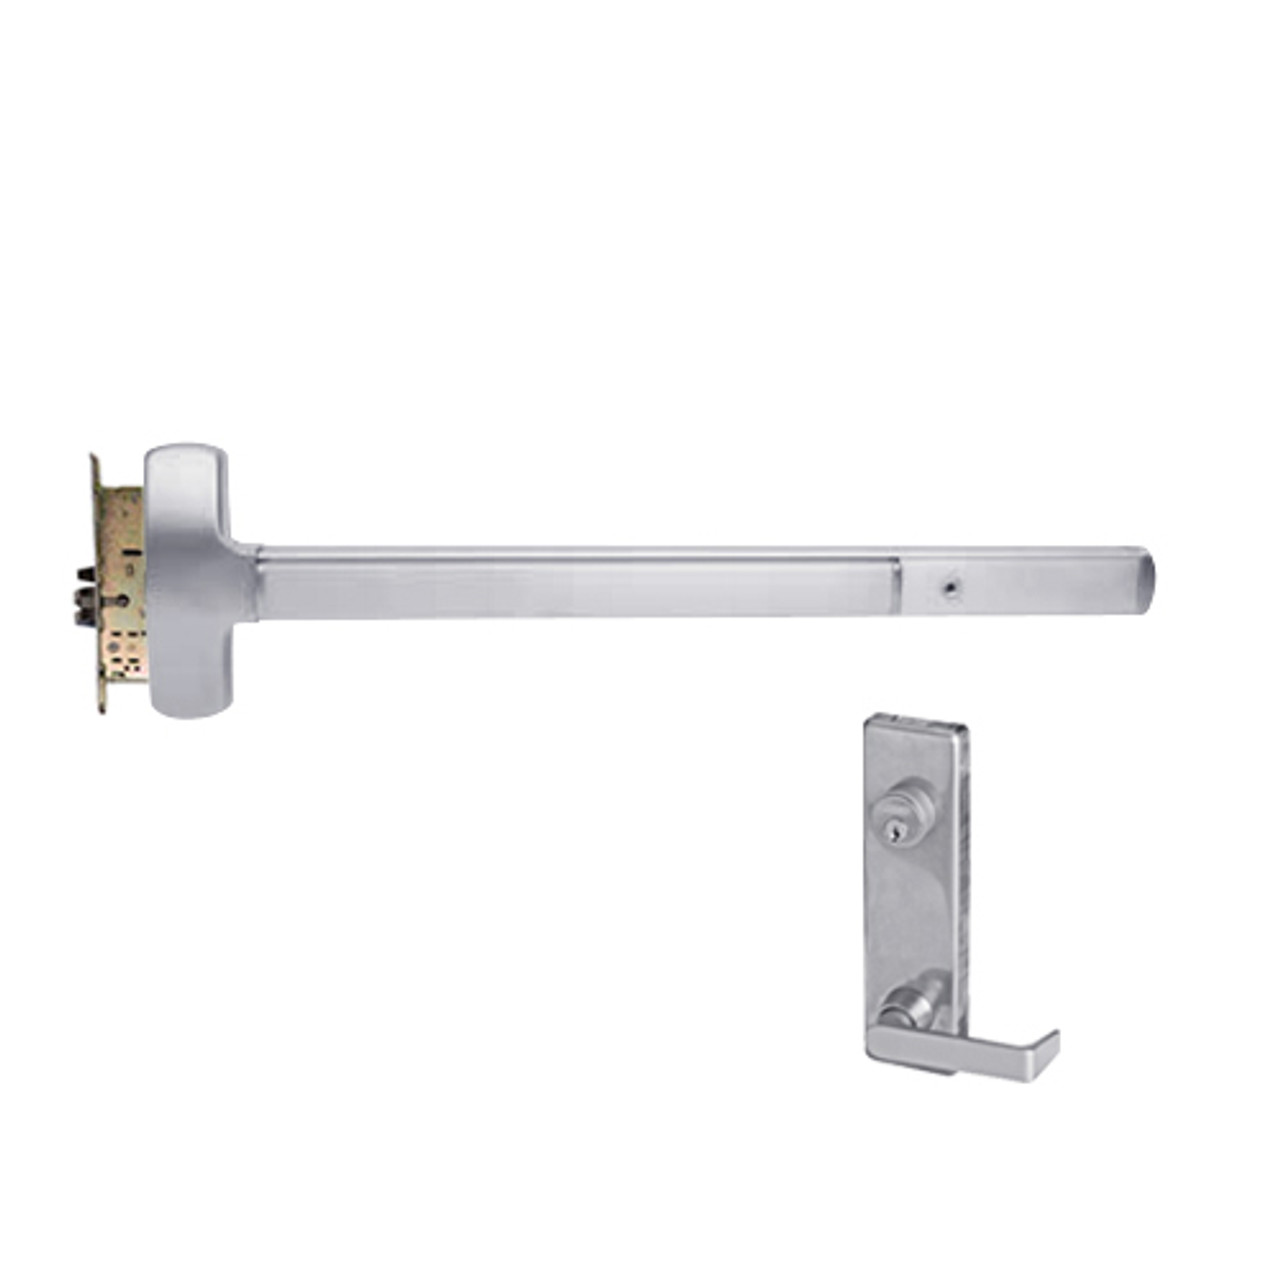 25-M-L-DANE-US32-3-RHR Falcon Exit Device in Polished Stainless Steel